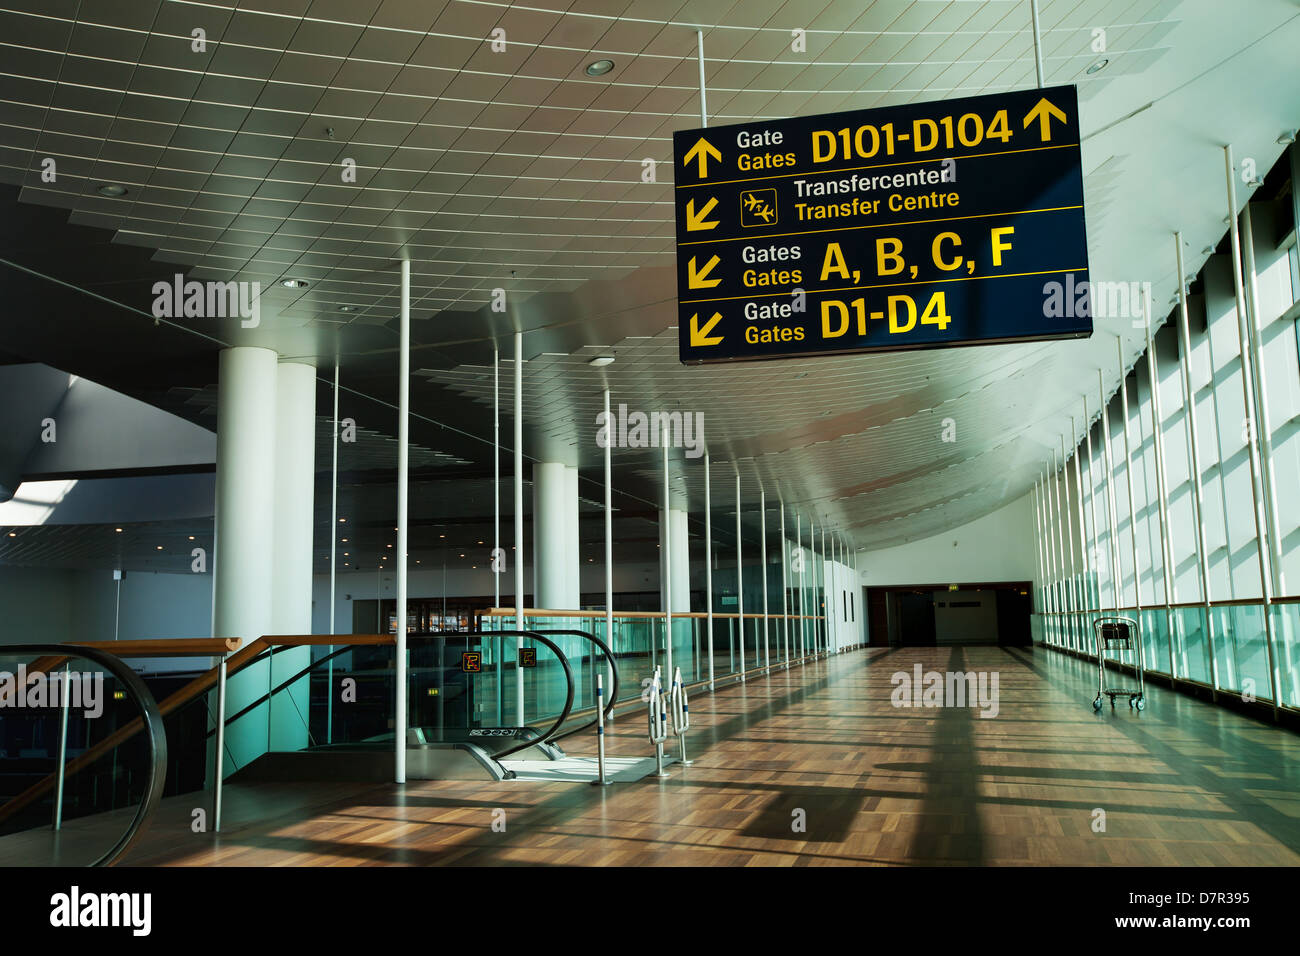 directional sign in abstract modern airport interior Stock Photo